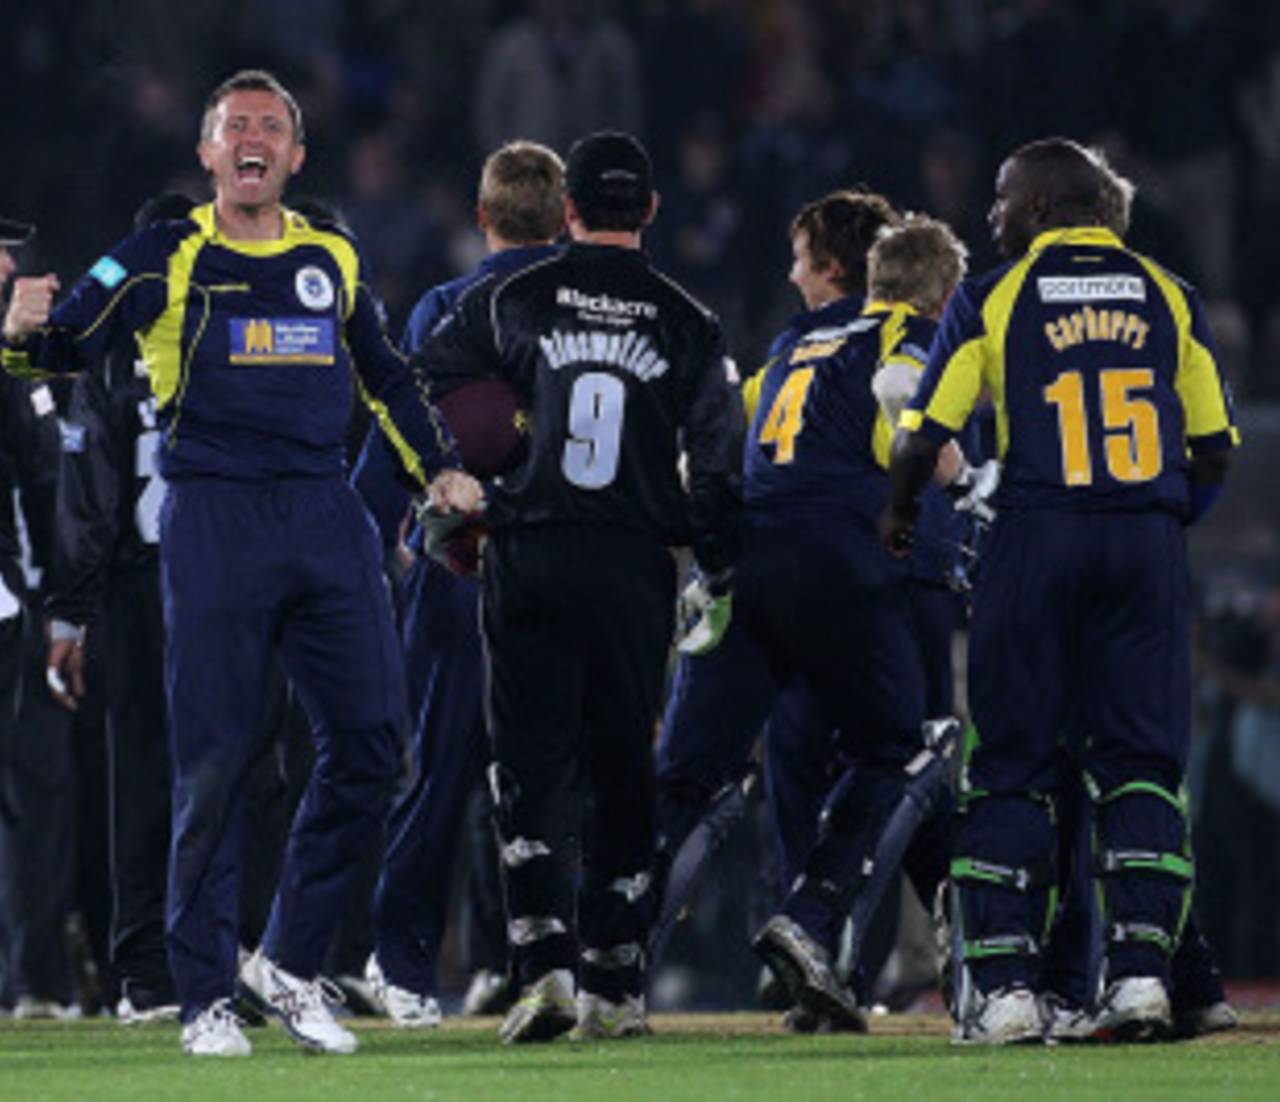 Dominic Cork was a key figure as Hampshire pulled off a stunning triumph&nbsp;&nbsp;&bull;&nbsp;&nbsp;Getty Images